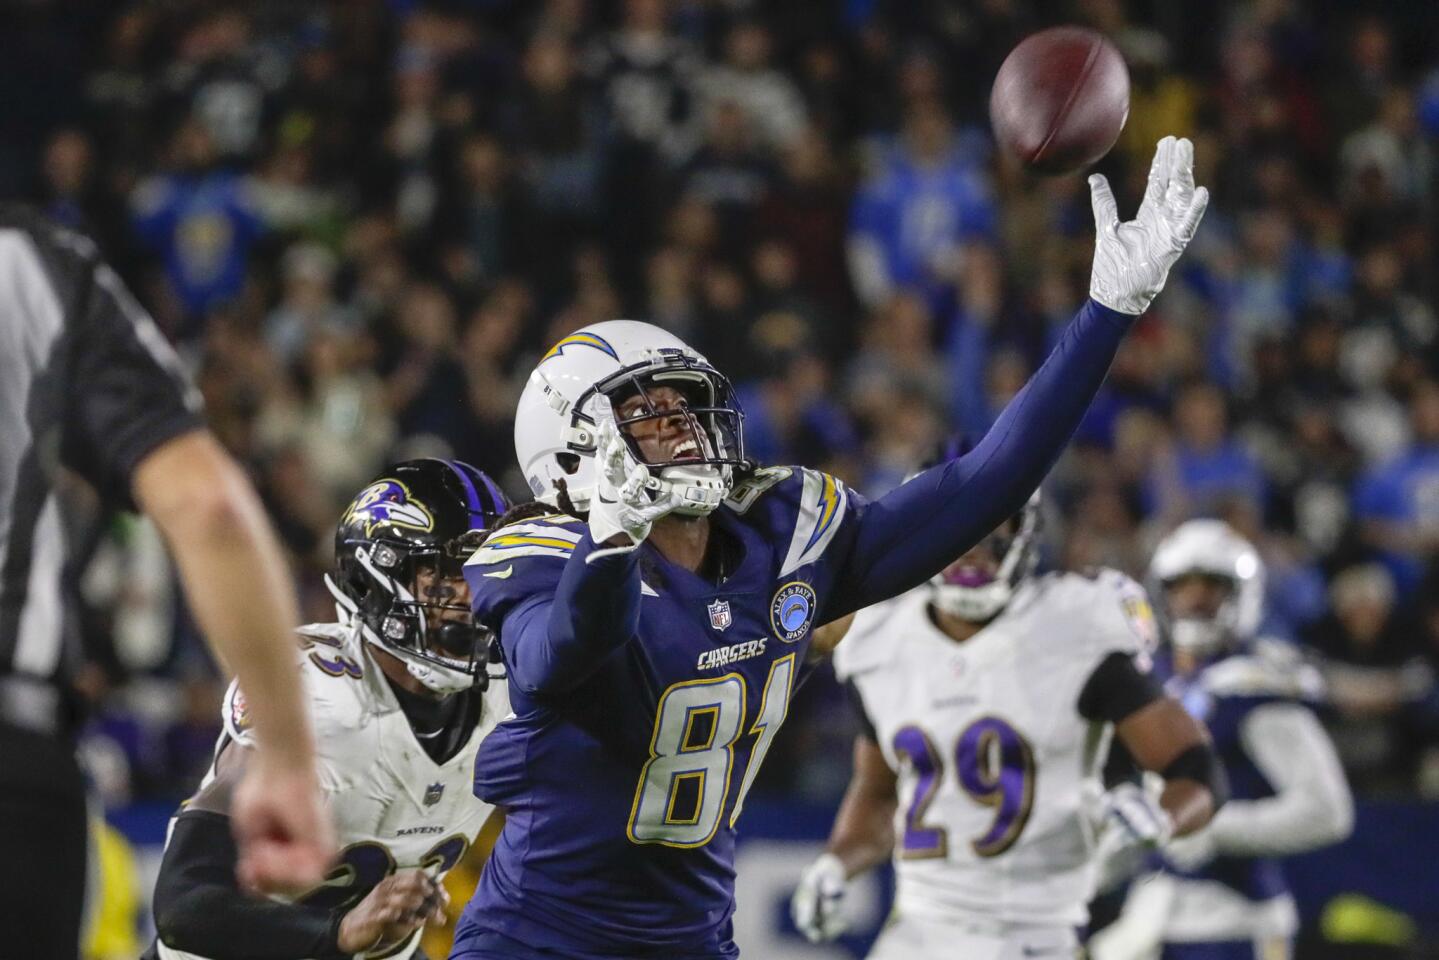 Chargers receiver Mike Williams can’t reach a pass from quarterback Philip Rivers during a fourth quarter drive at StubHub Center.